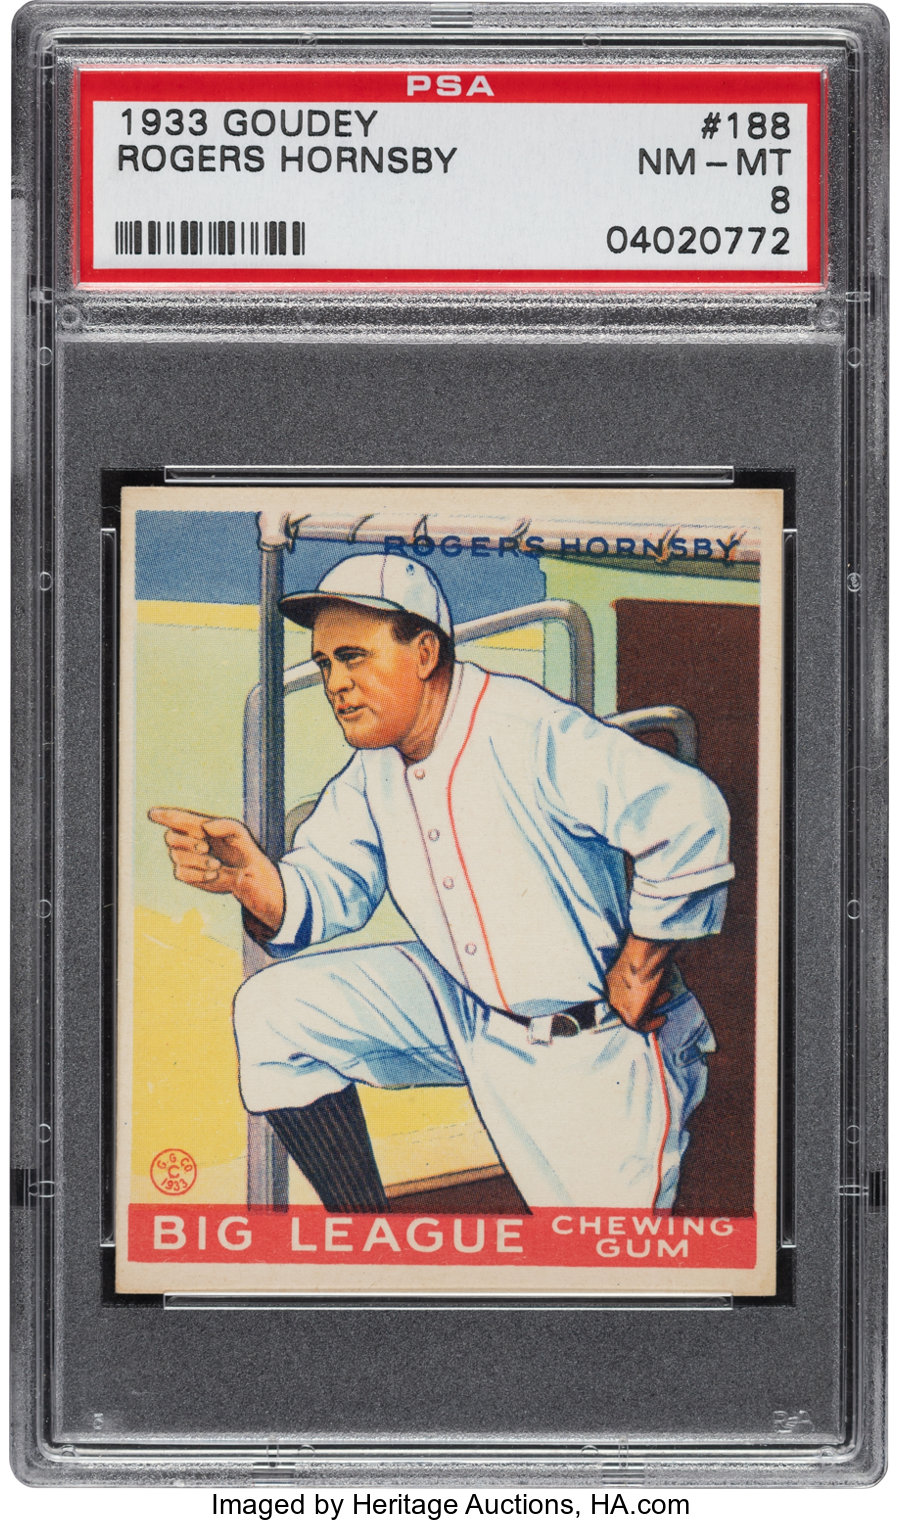 1933 Goudey Rogers Hornsby #188 PSA NM-MT 8